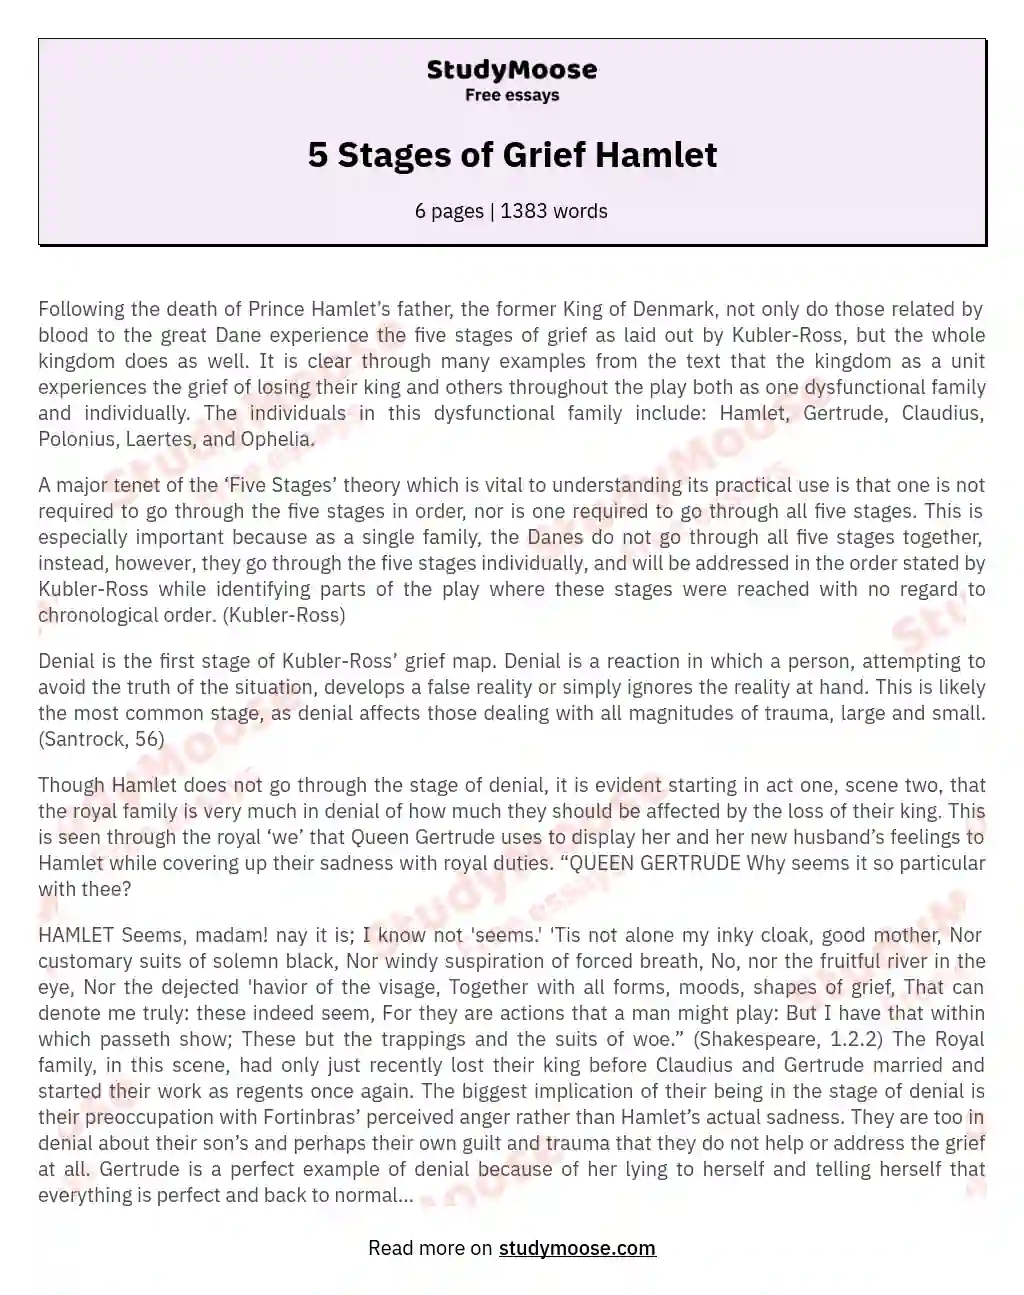 5 Stages of Grief Hamlet